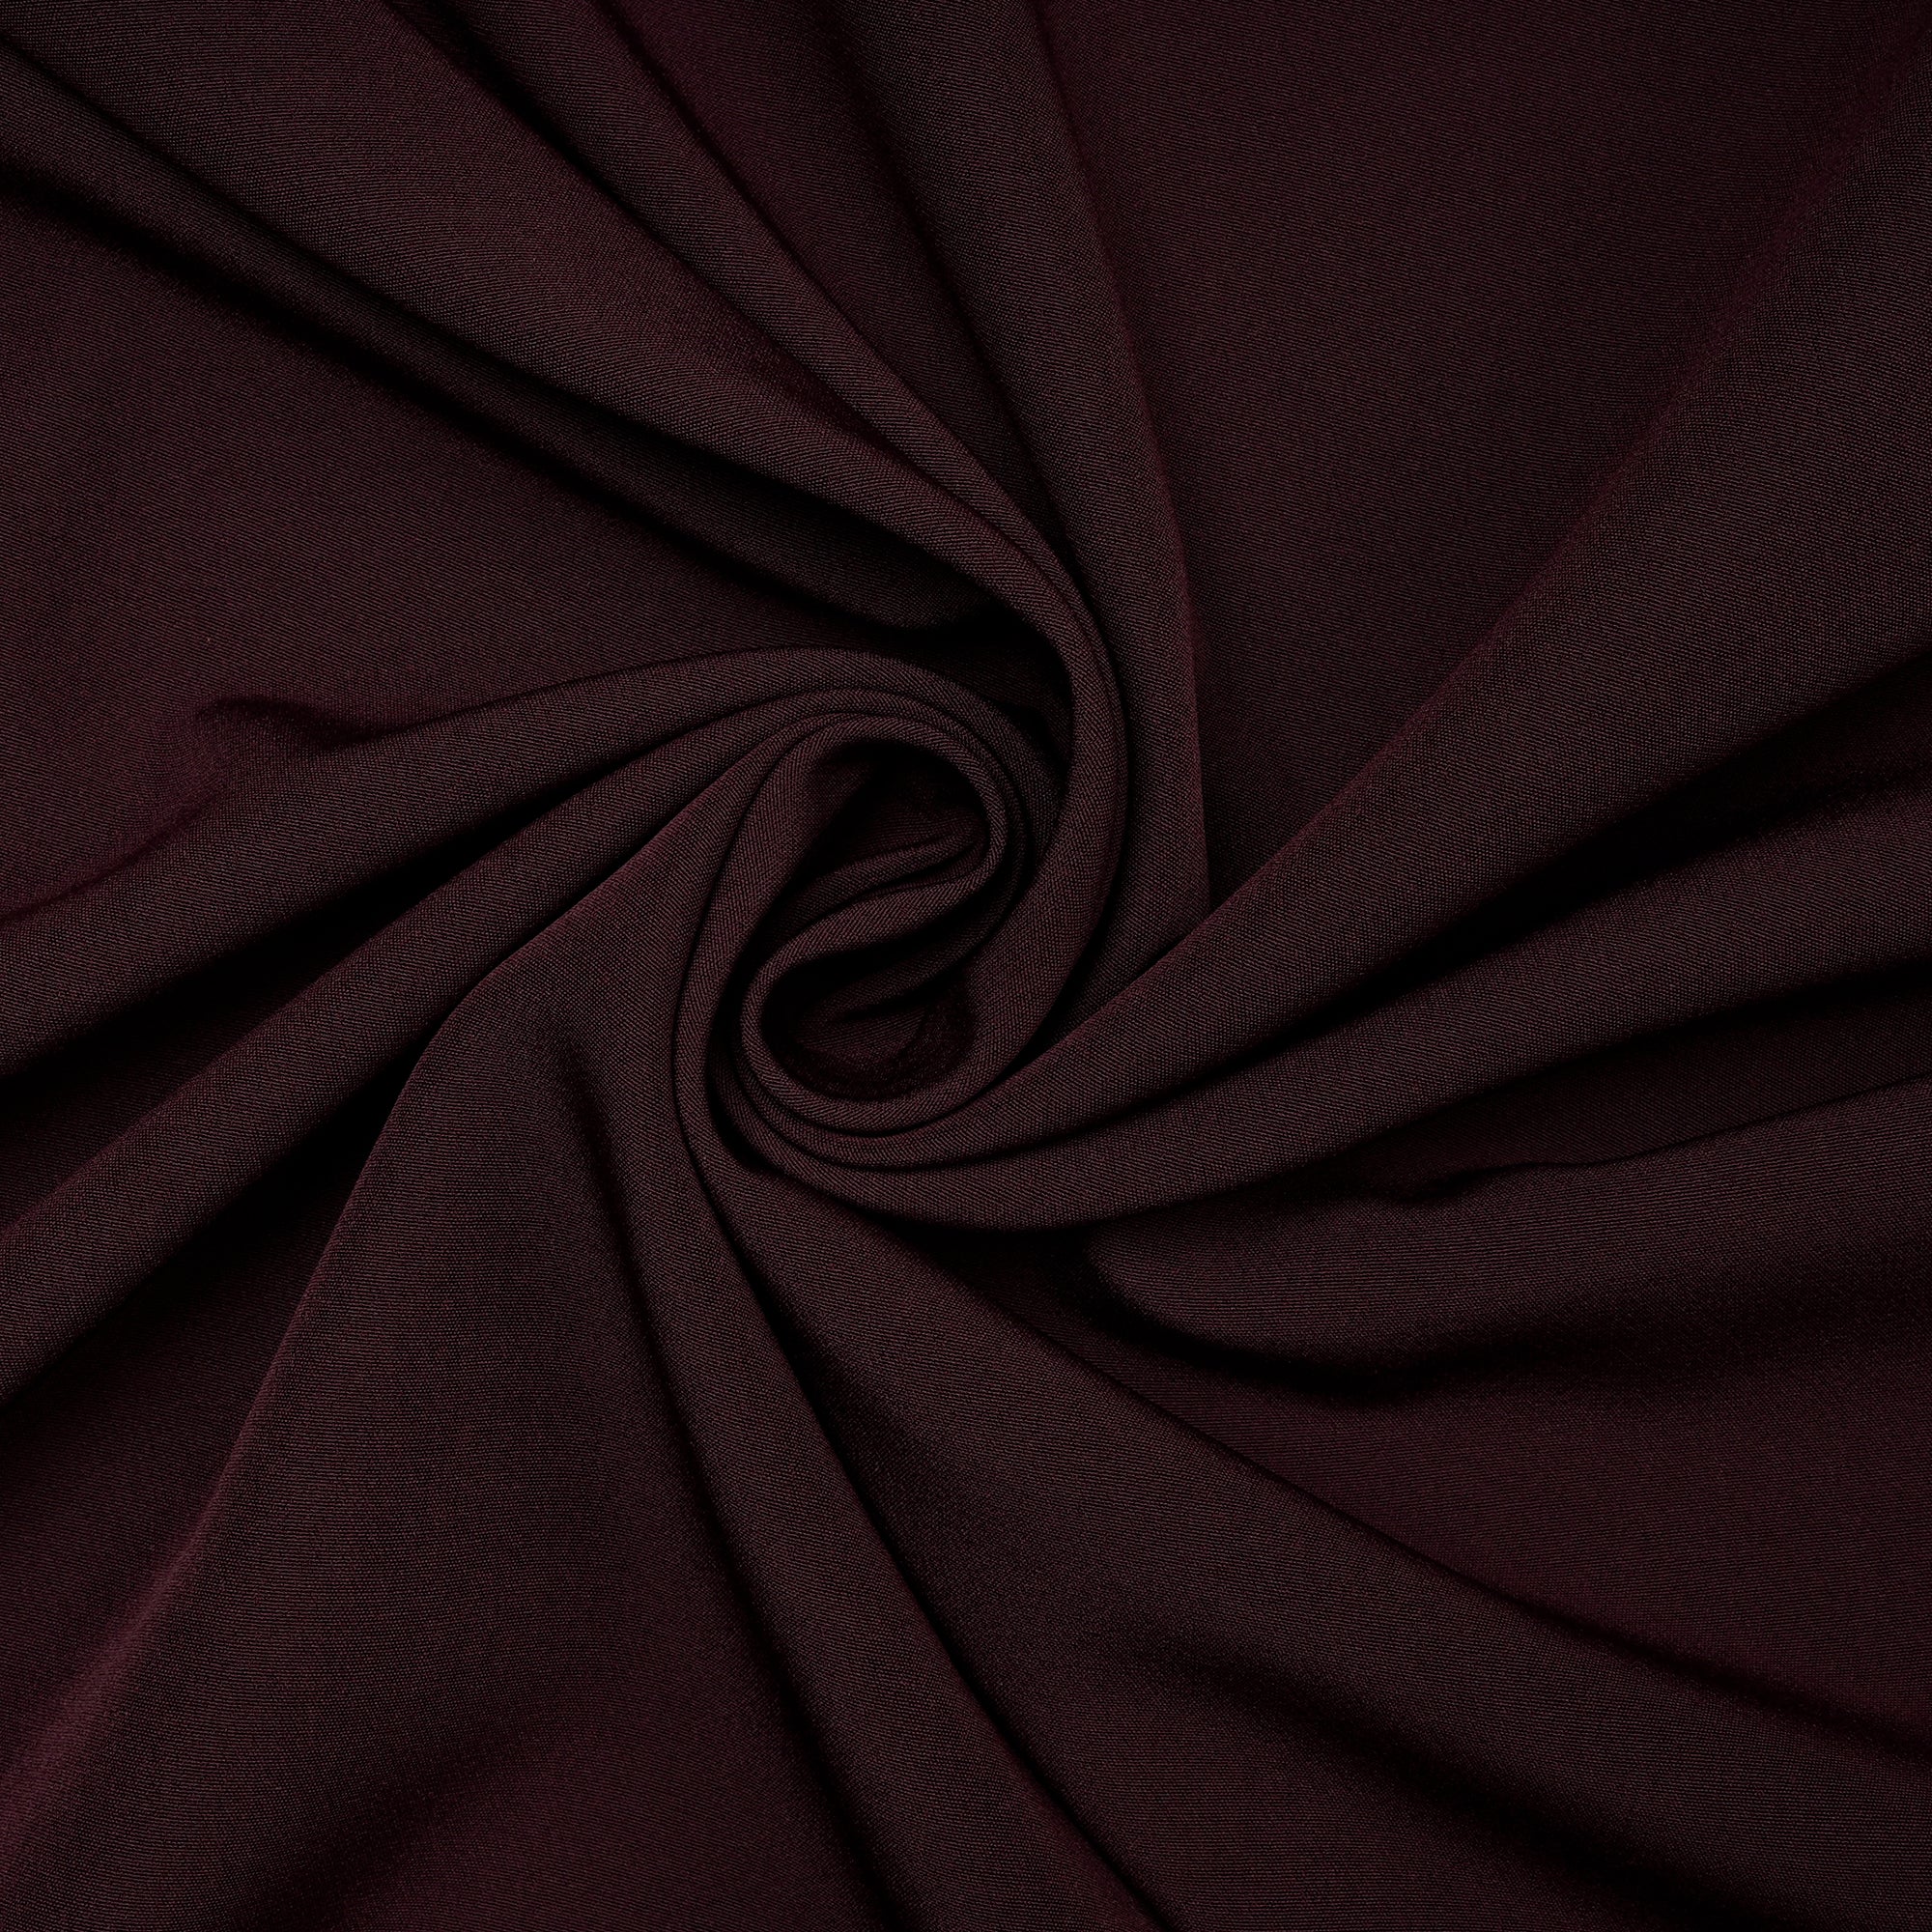 Mauve Wine Solid Dyed Imported Banana Crepe Fabric (60" Width)